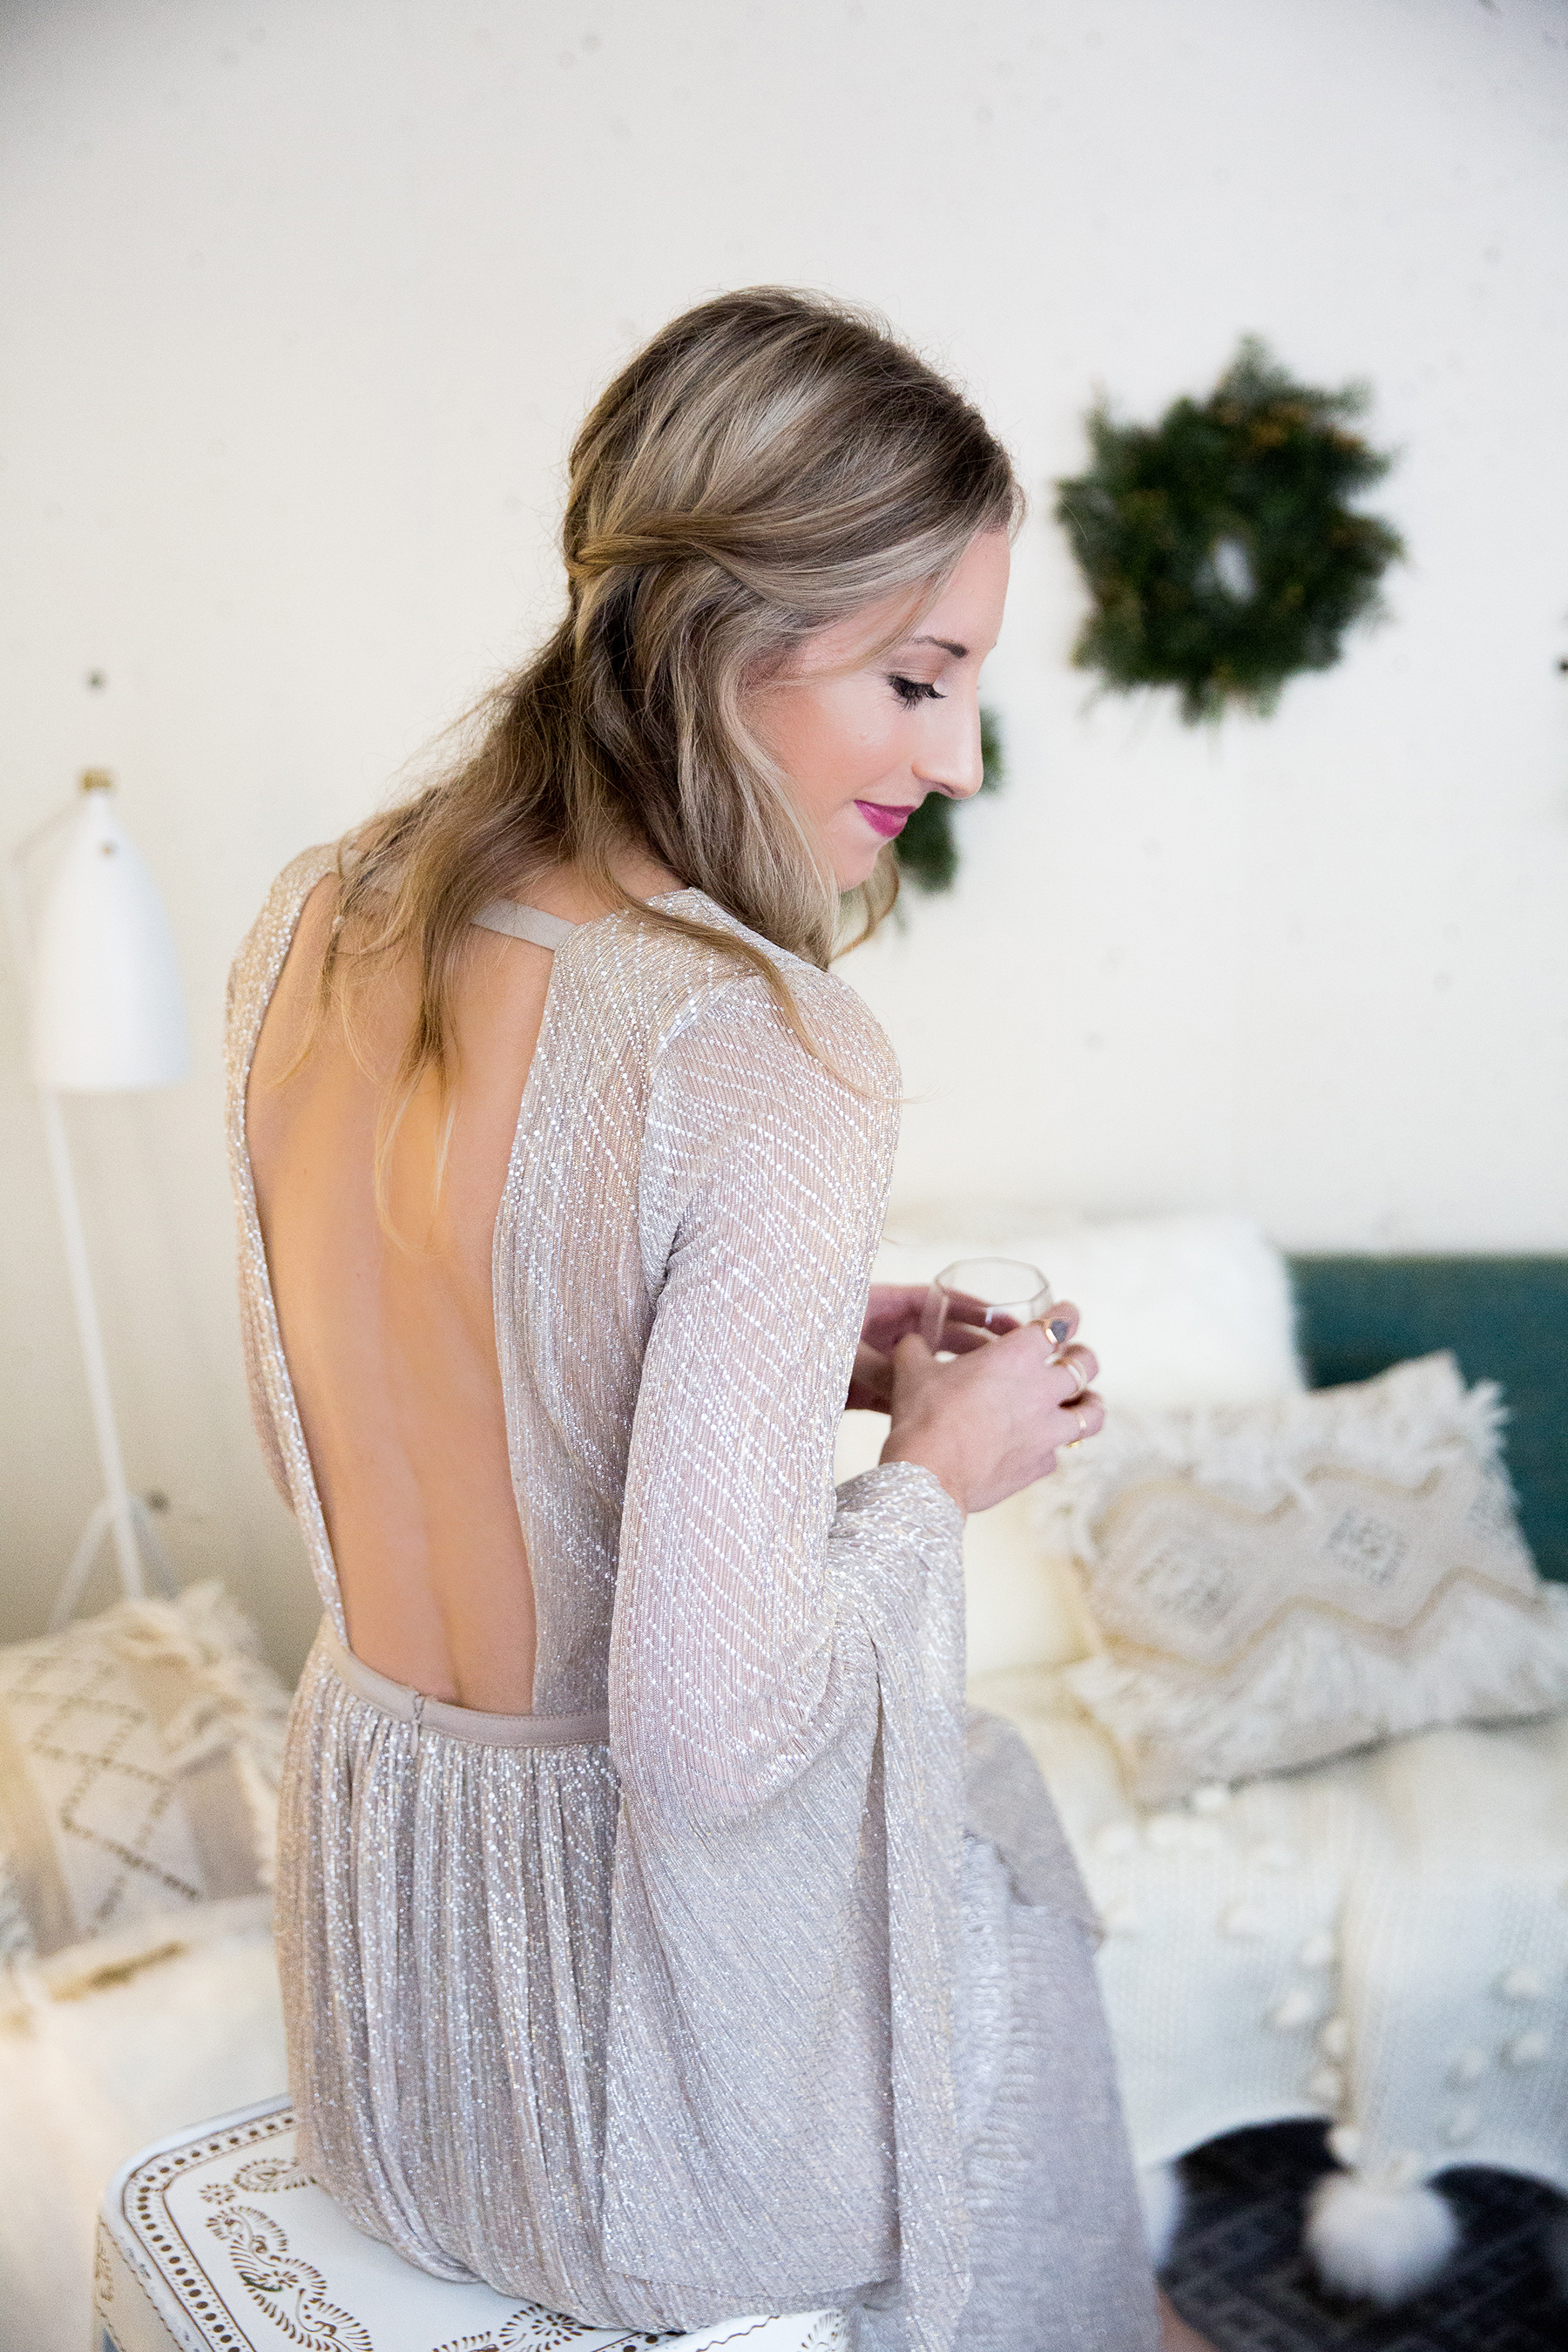 new year's eve dresses 2016, NYE dresses, new years dresses, sparkly dress, shimmer dress, urban outfitters dress, party dresses, going out dresses, new years 2016, photography by Andrea Posadas of Amanda Holstein for Advicefroma20Something.com